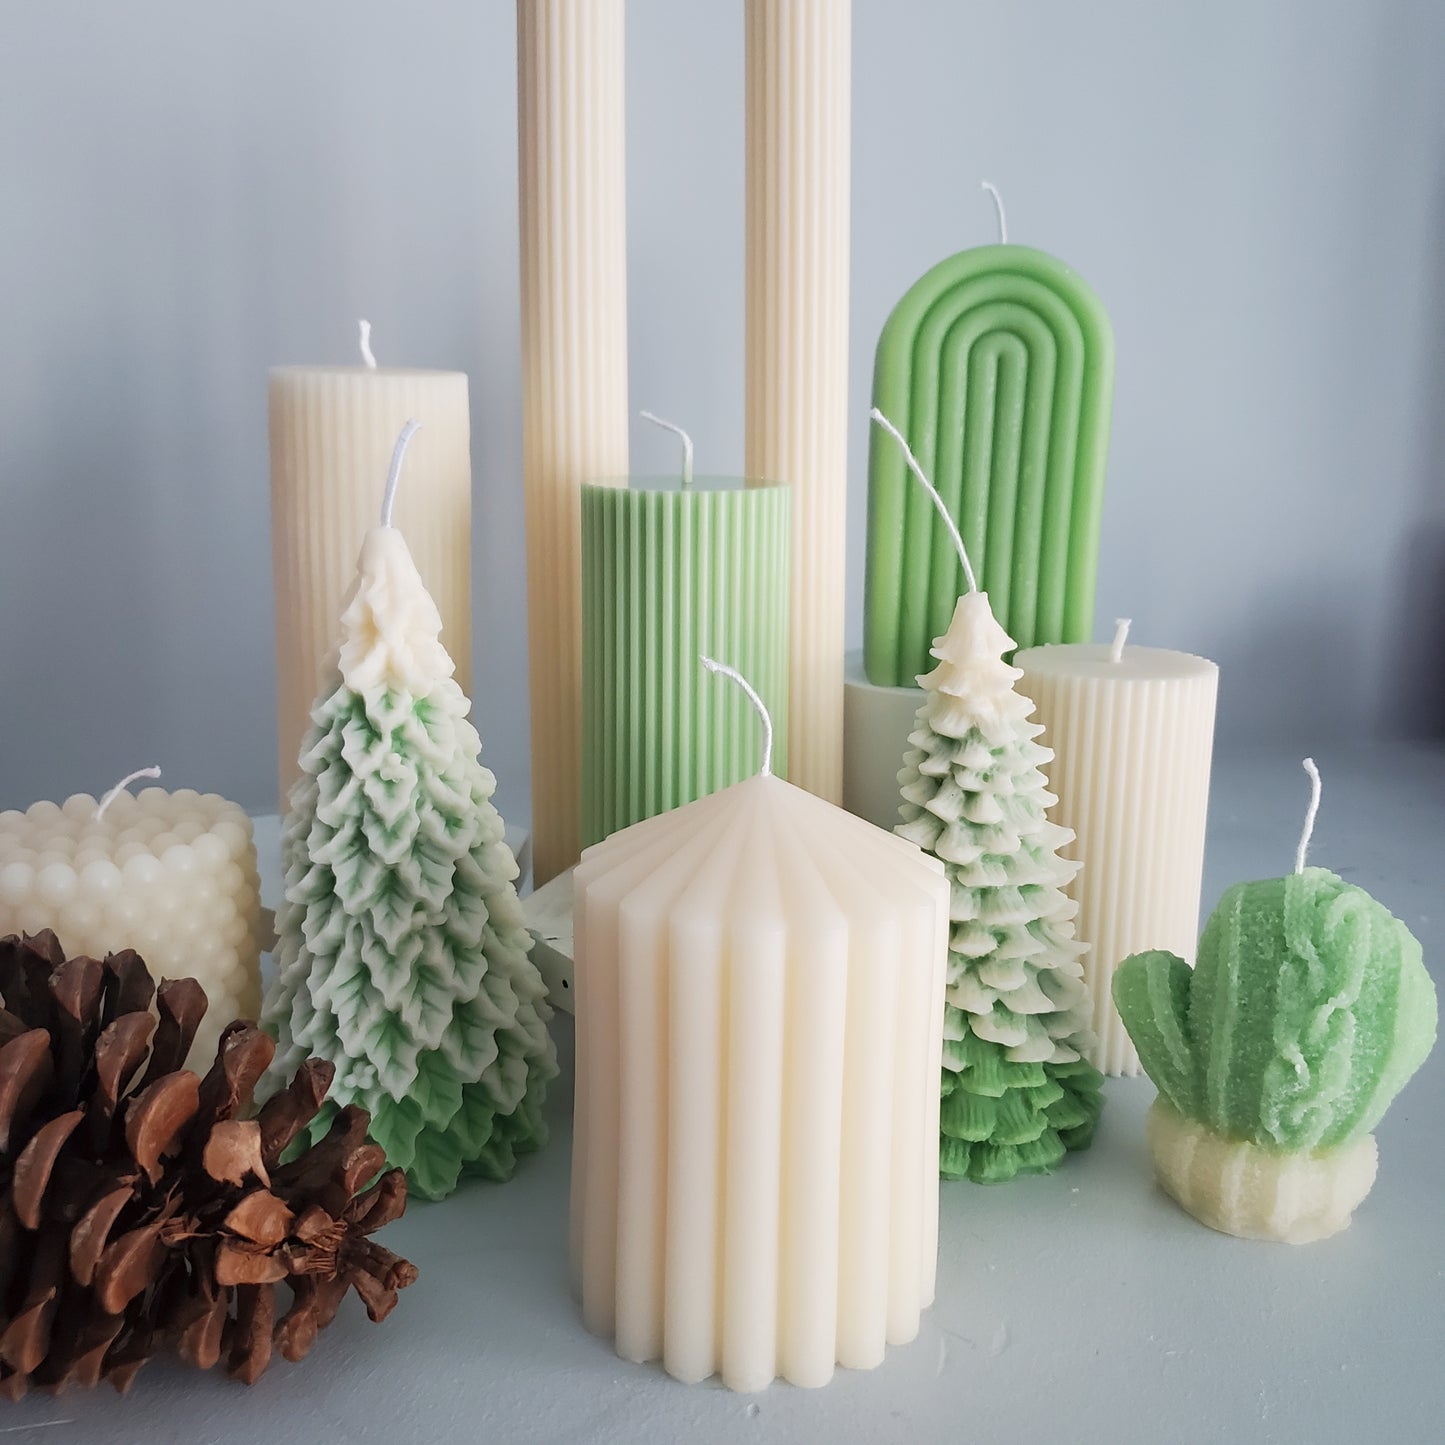 Peaked ribbed candle